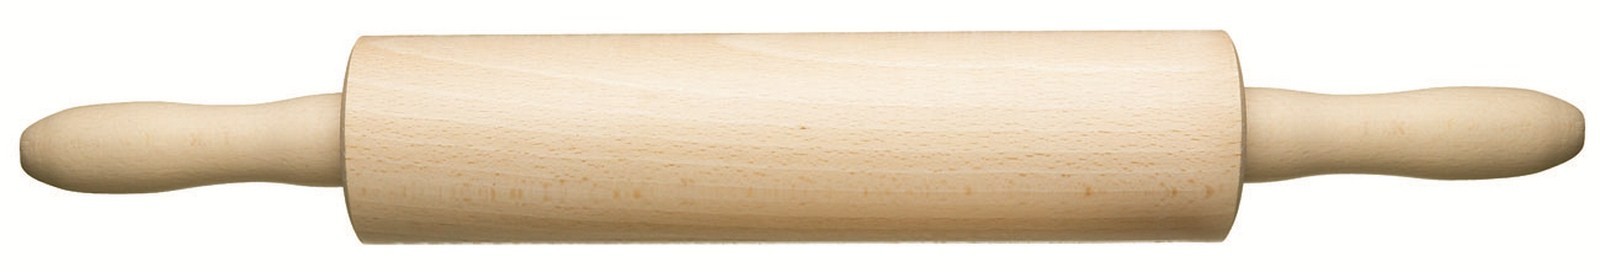 Kitchen Craft Revolving Wooden Rolling Pin